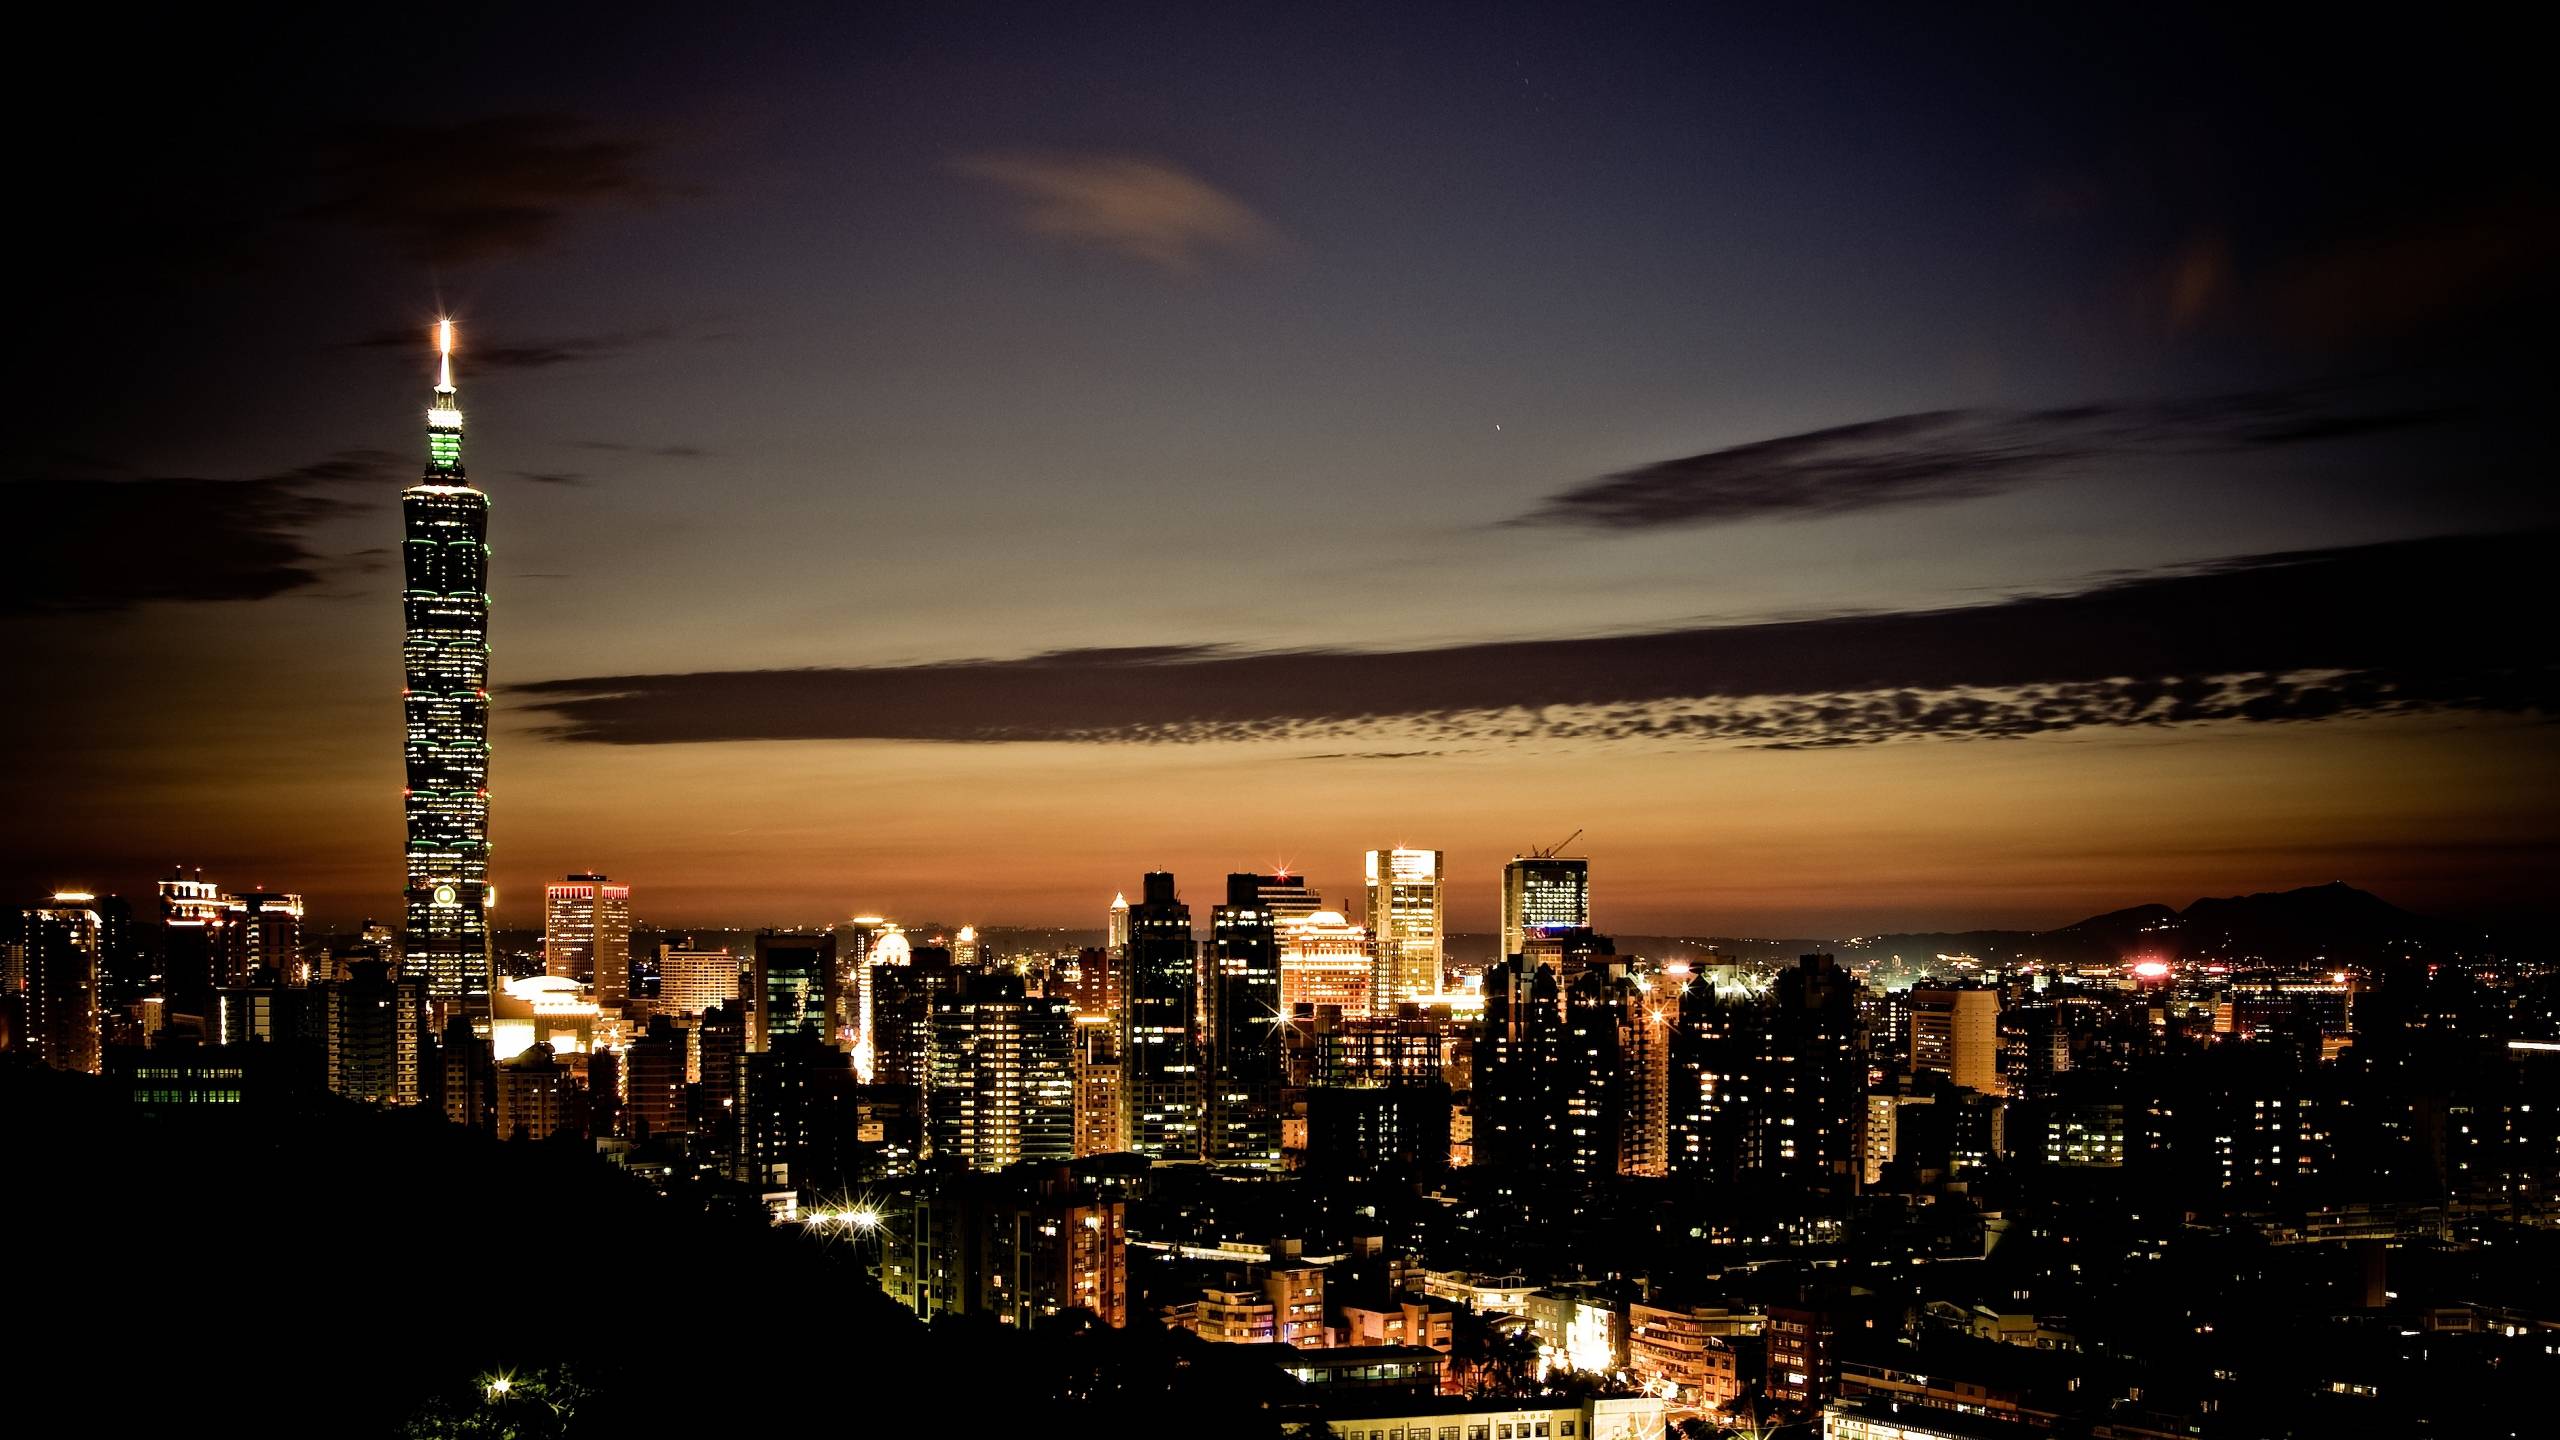 Nice HD Taipei at Night wallpaper for your iMac. High Quality PC